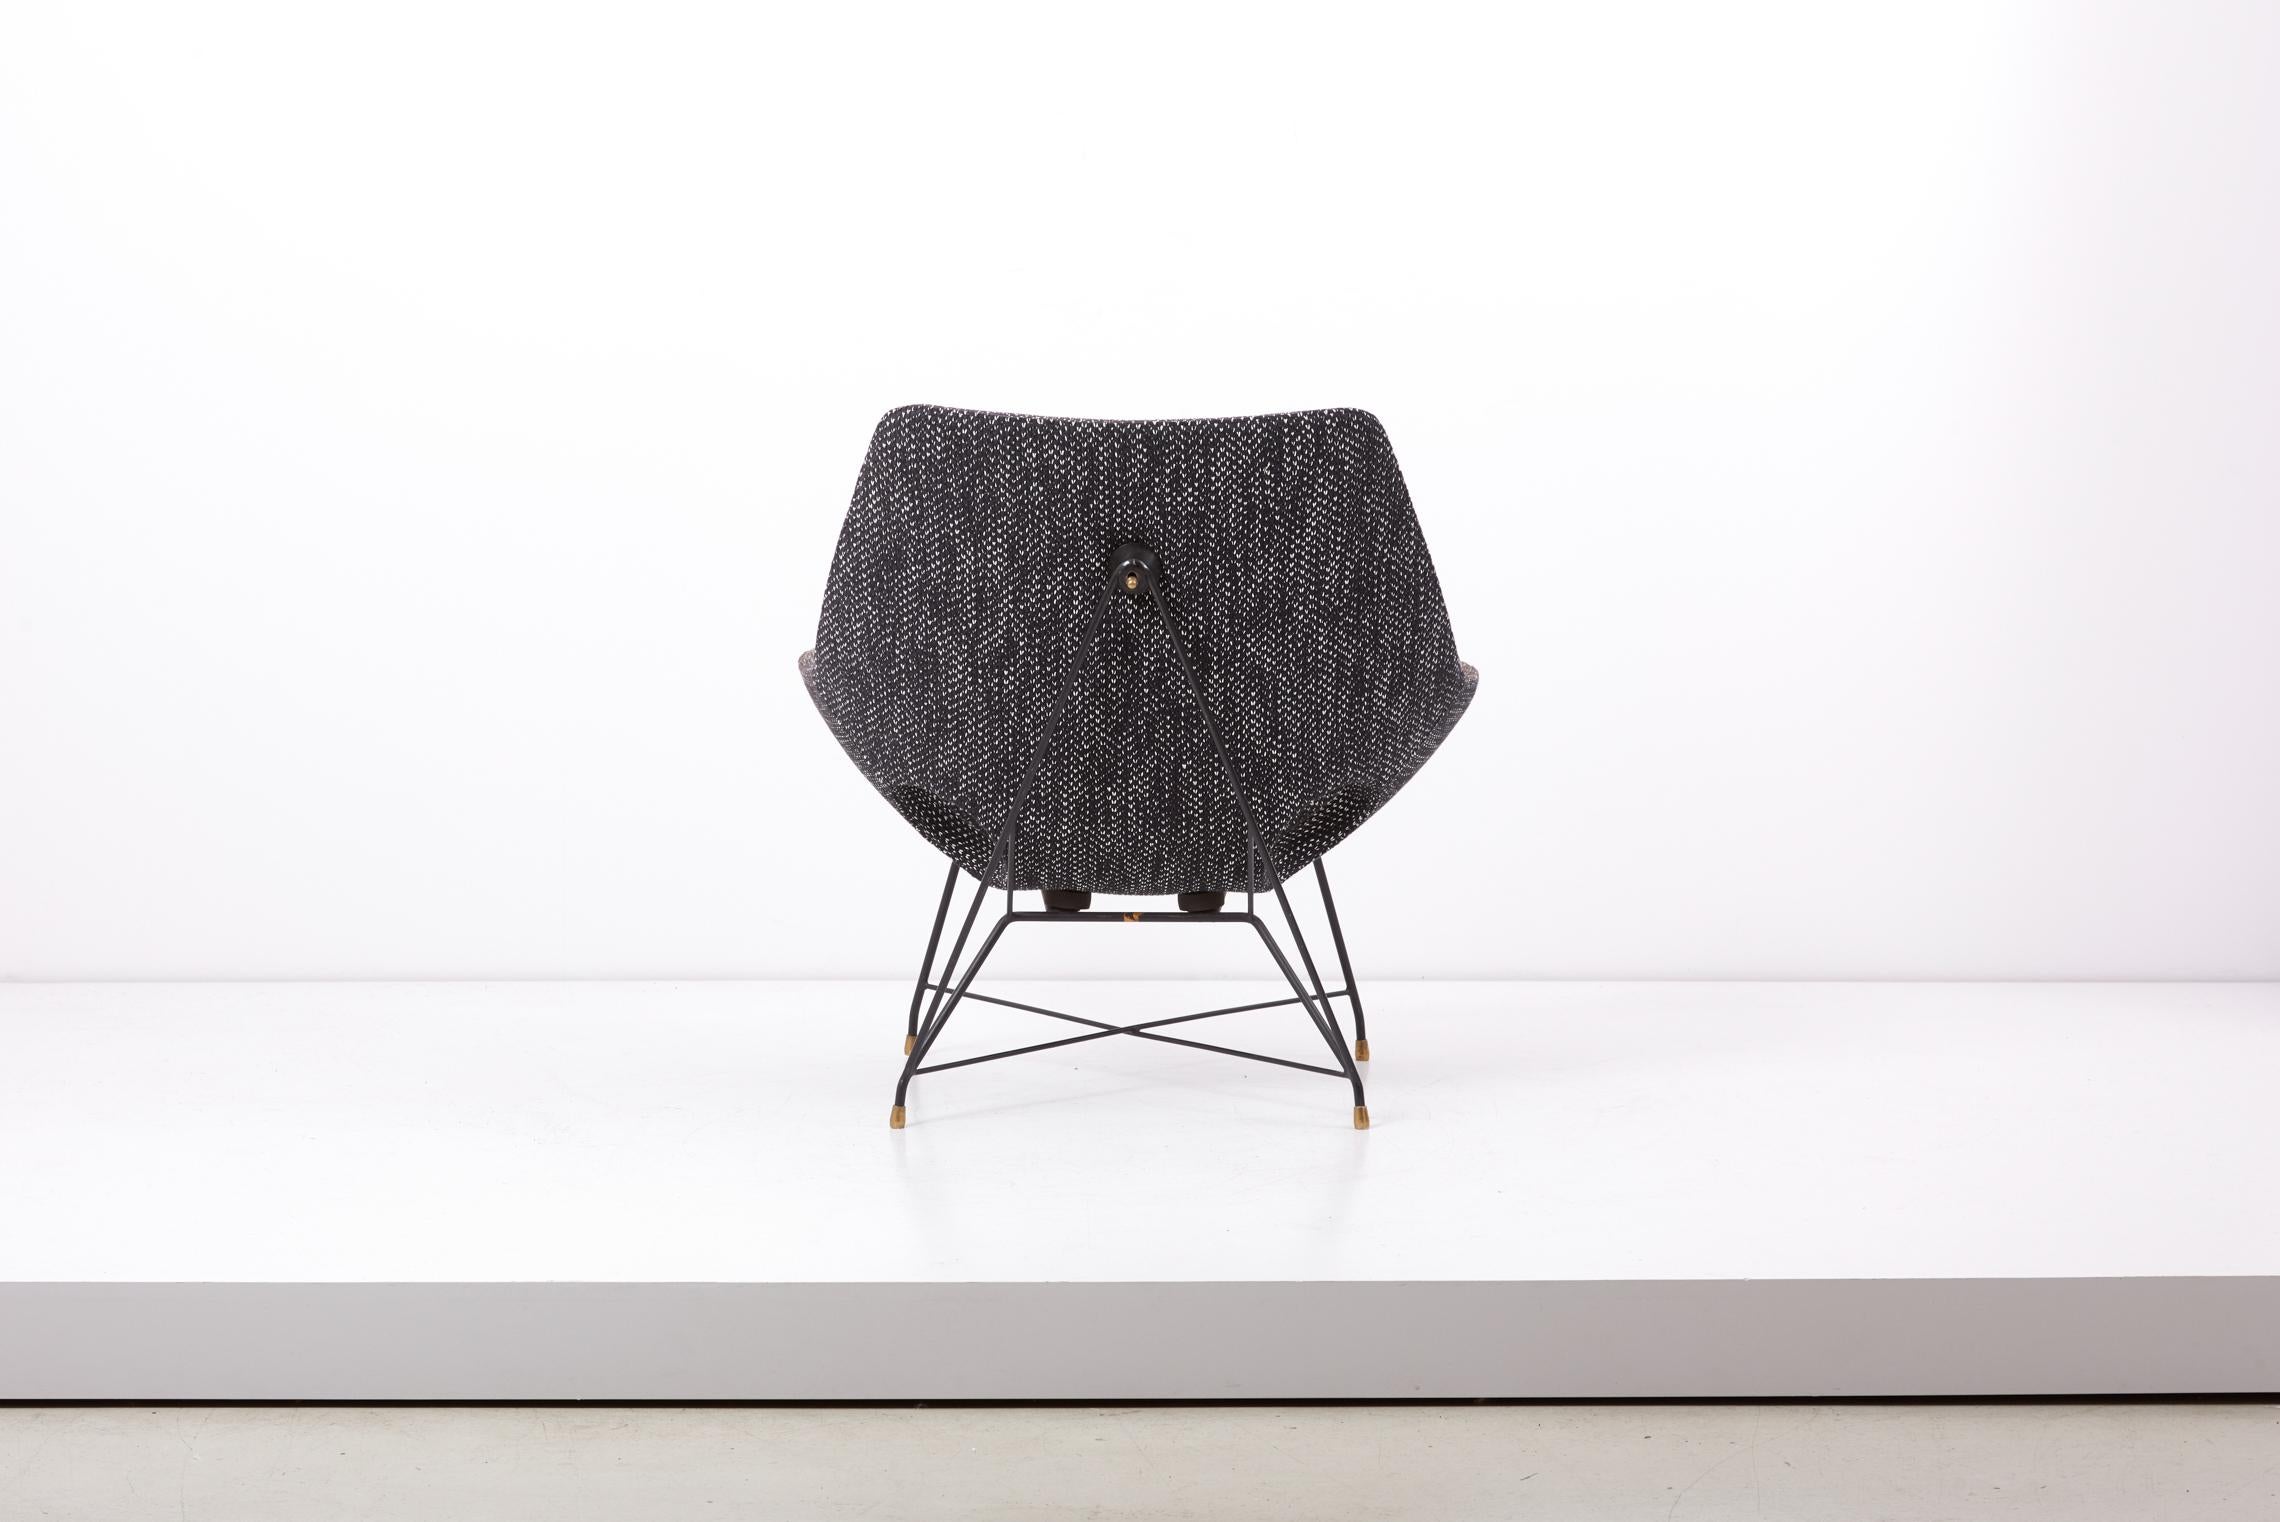 Metal Lounge Chair by Augusto Bozzi for Saporiti in black & white fabric, Italy, 1950s For Sale